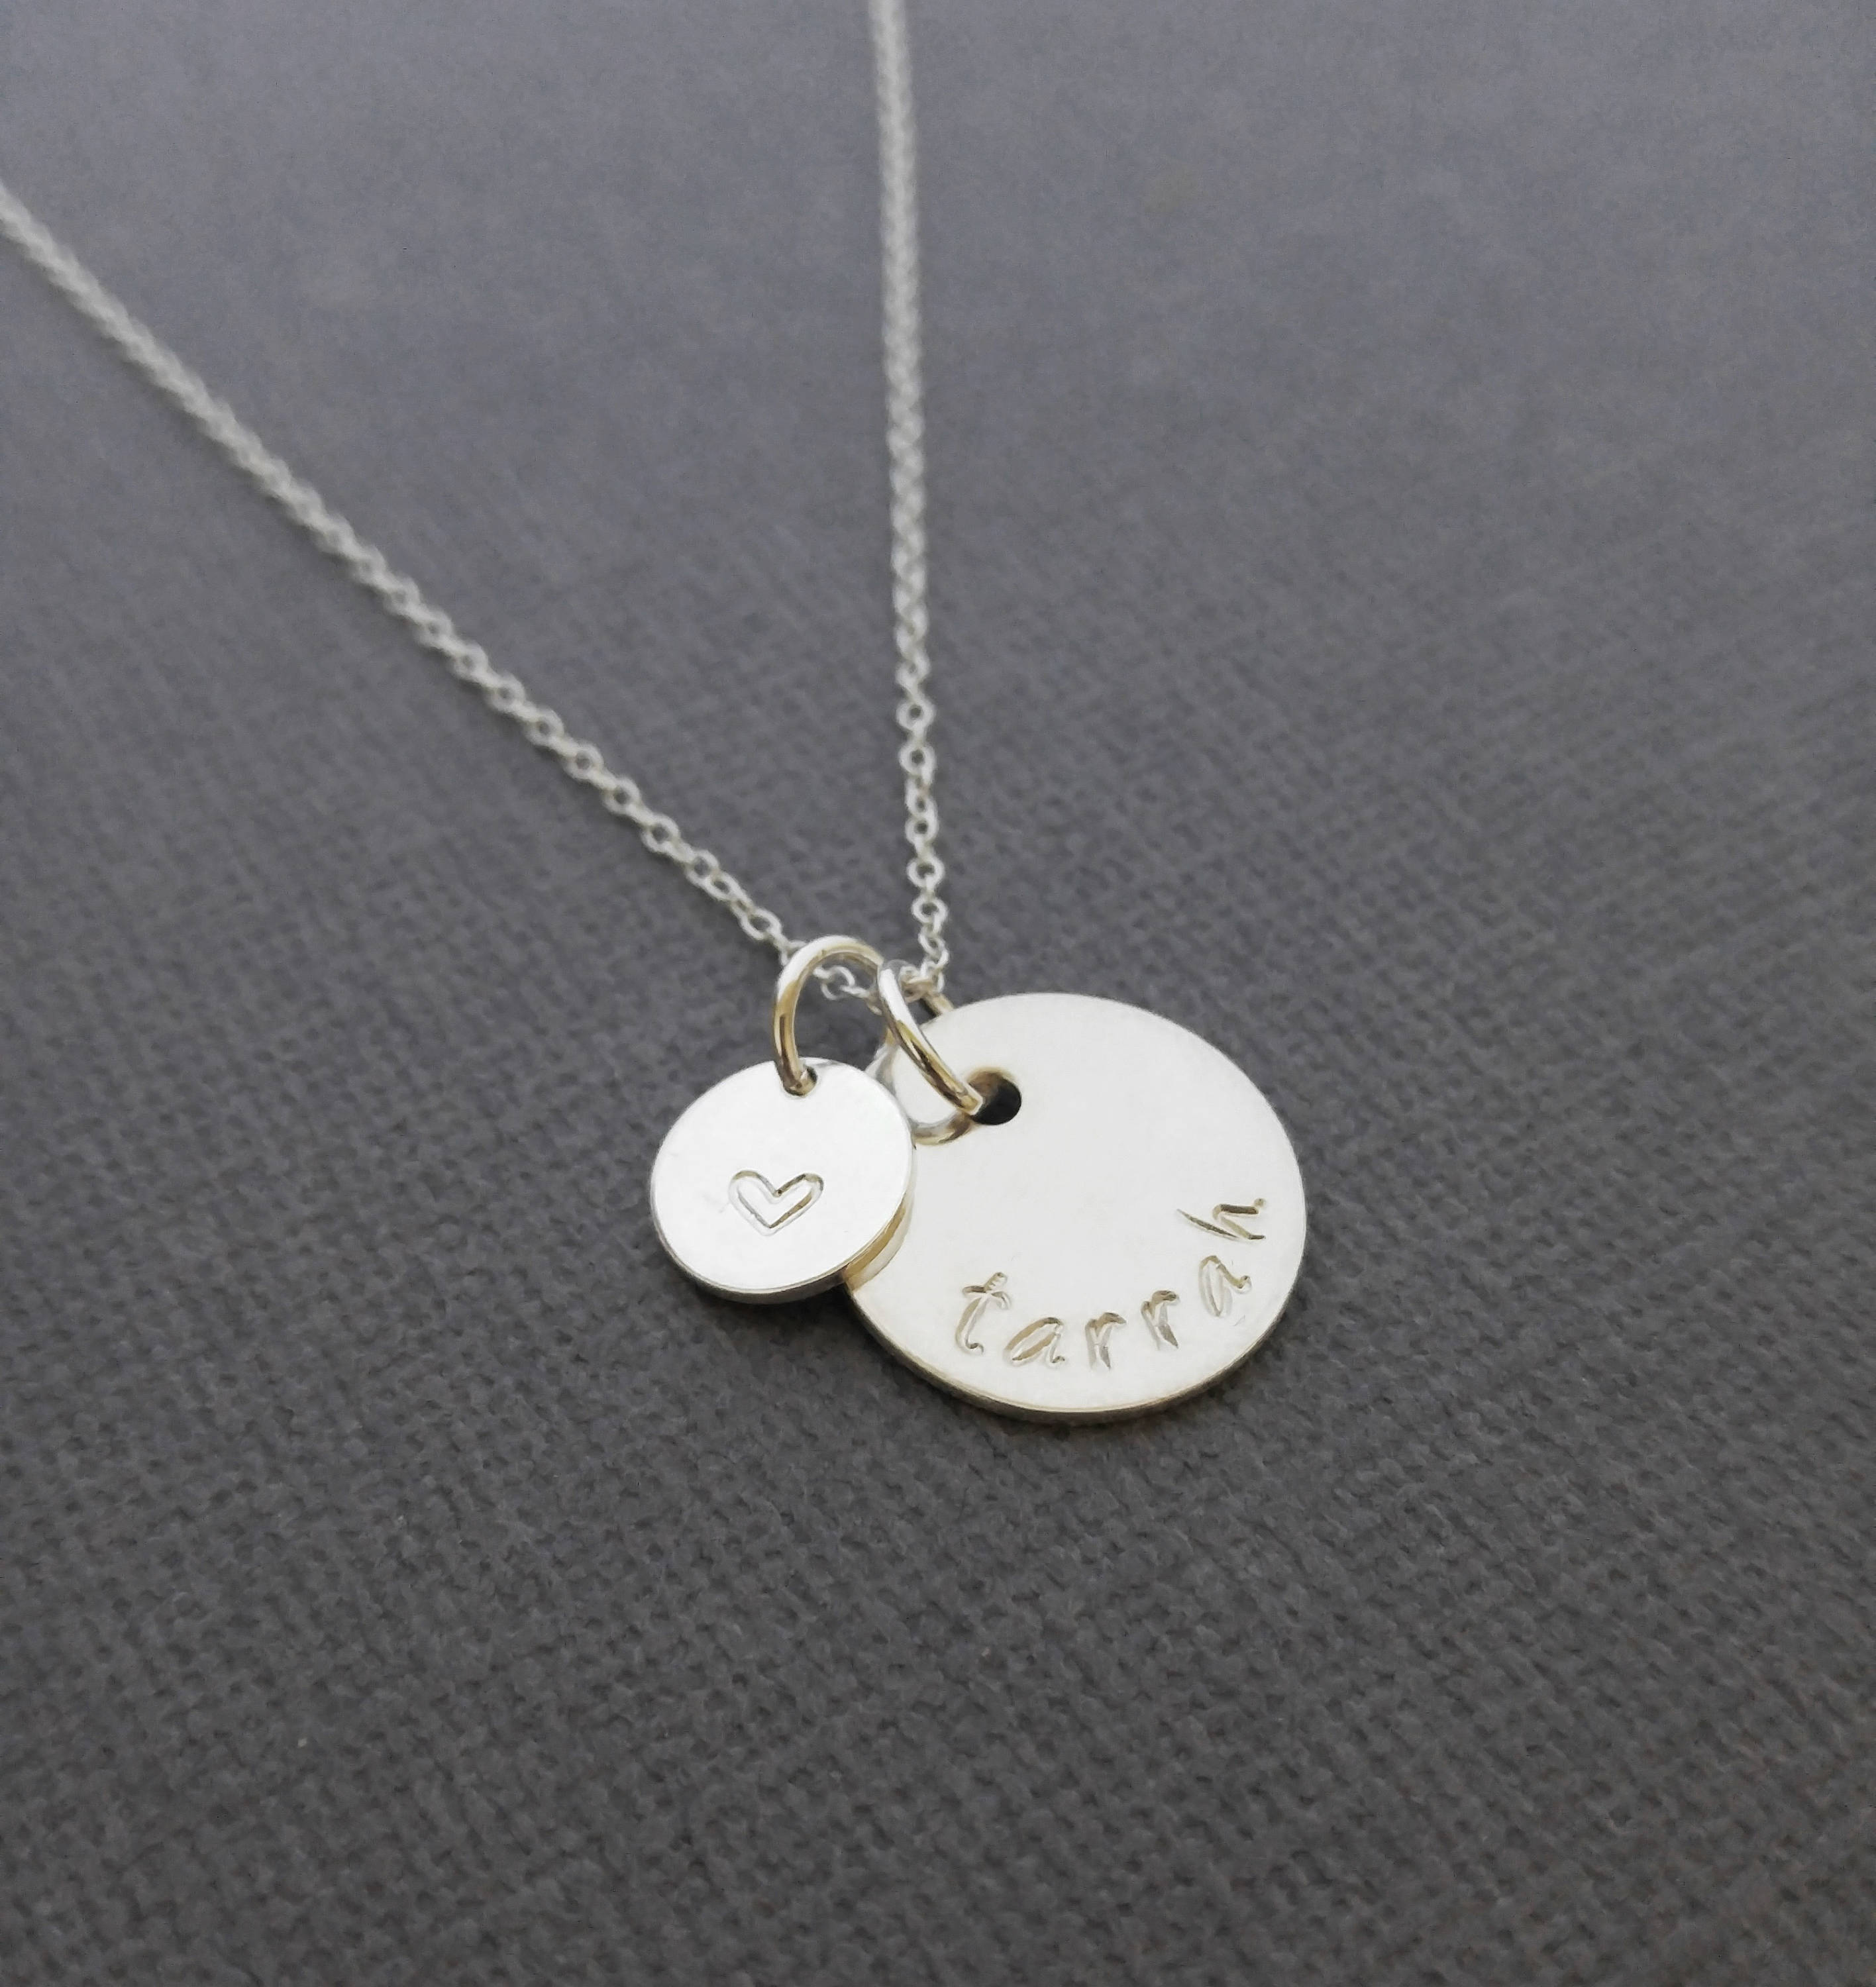 Personalized Initial Necklace Custom Date Necklace Sterling